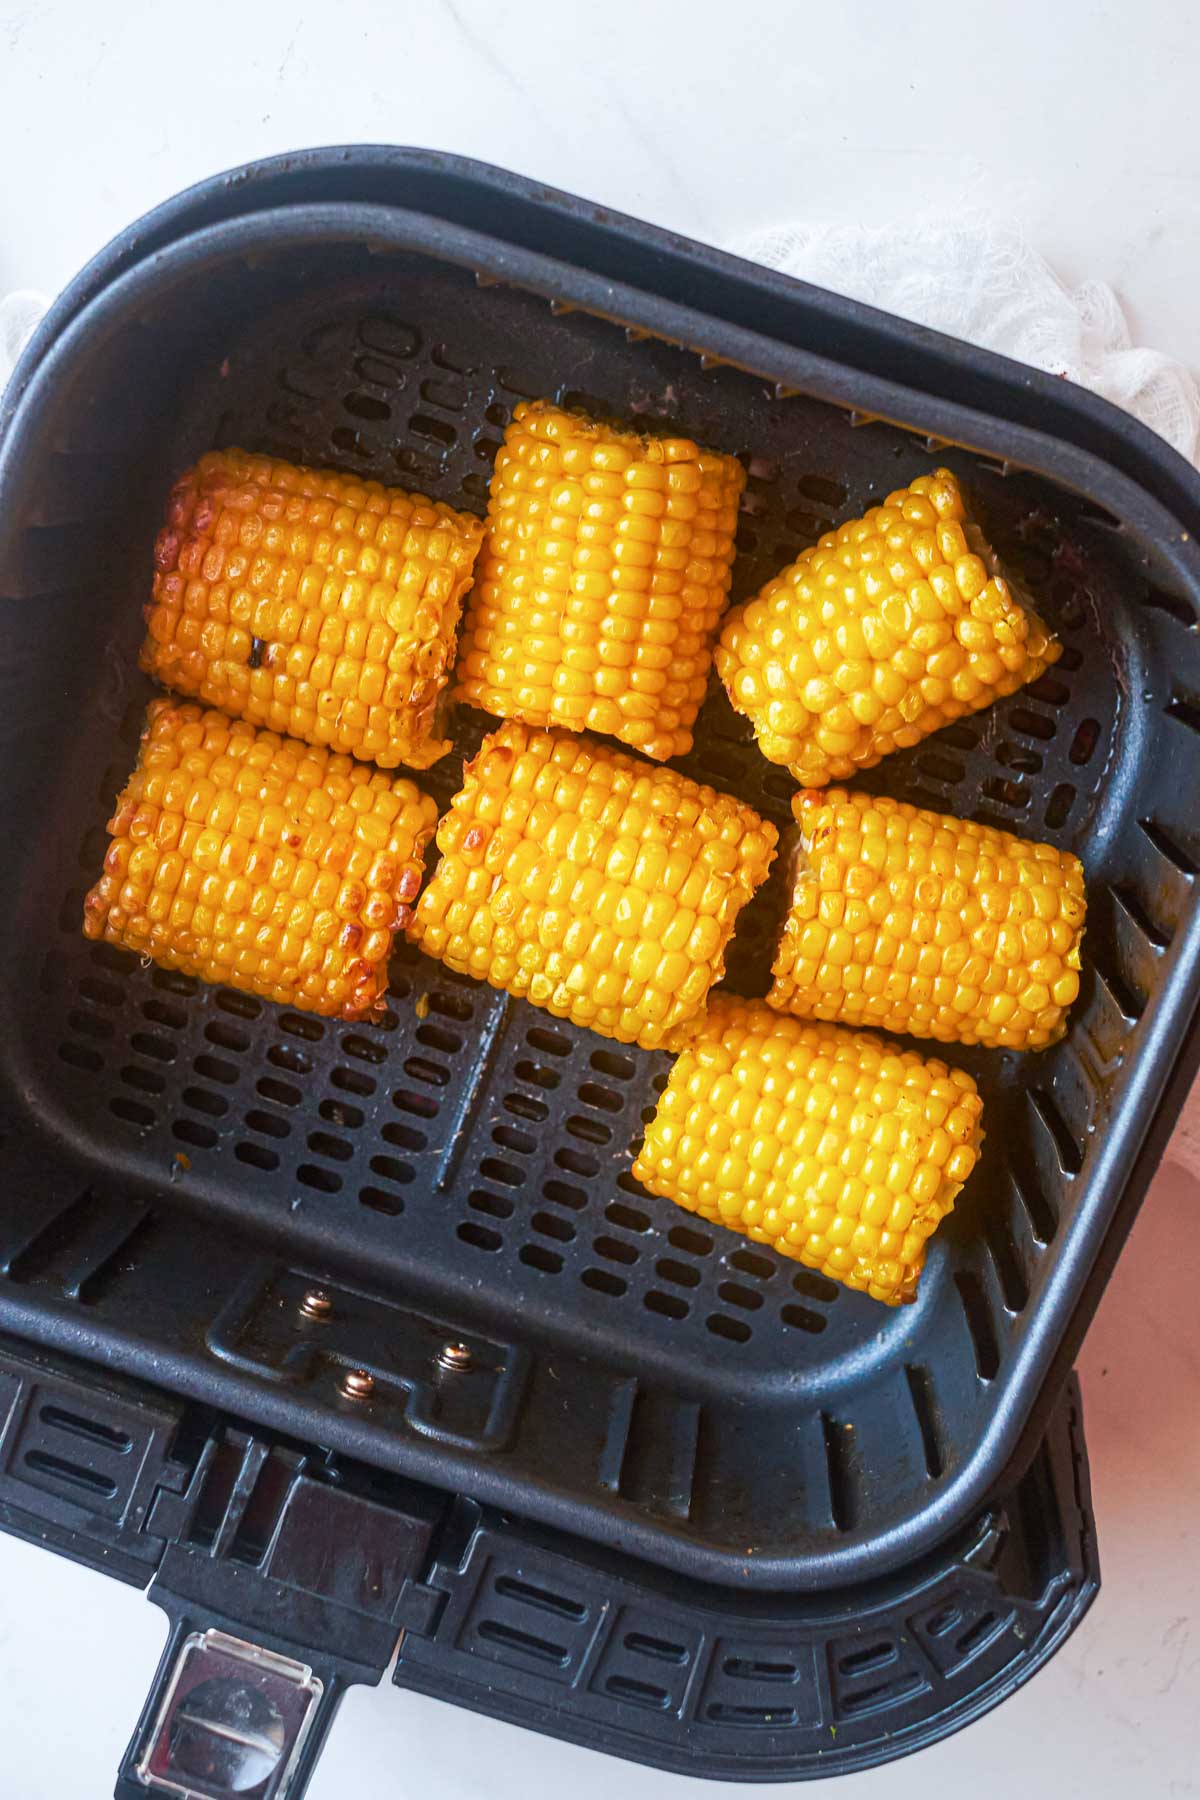 Top-down view of frozen corn on the cob in an air fryer basket